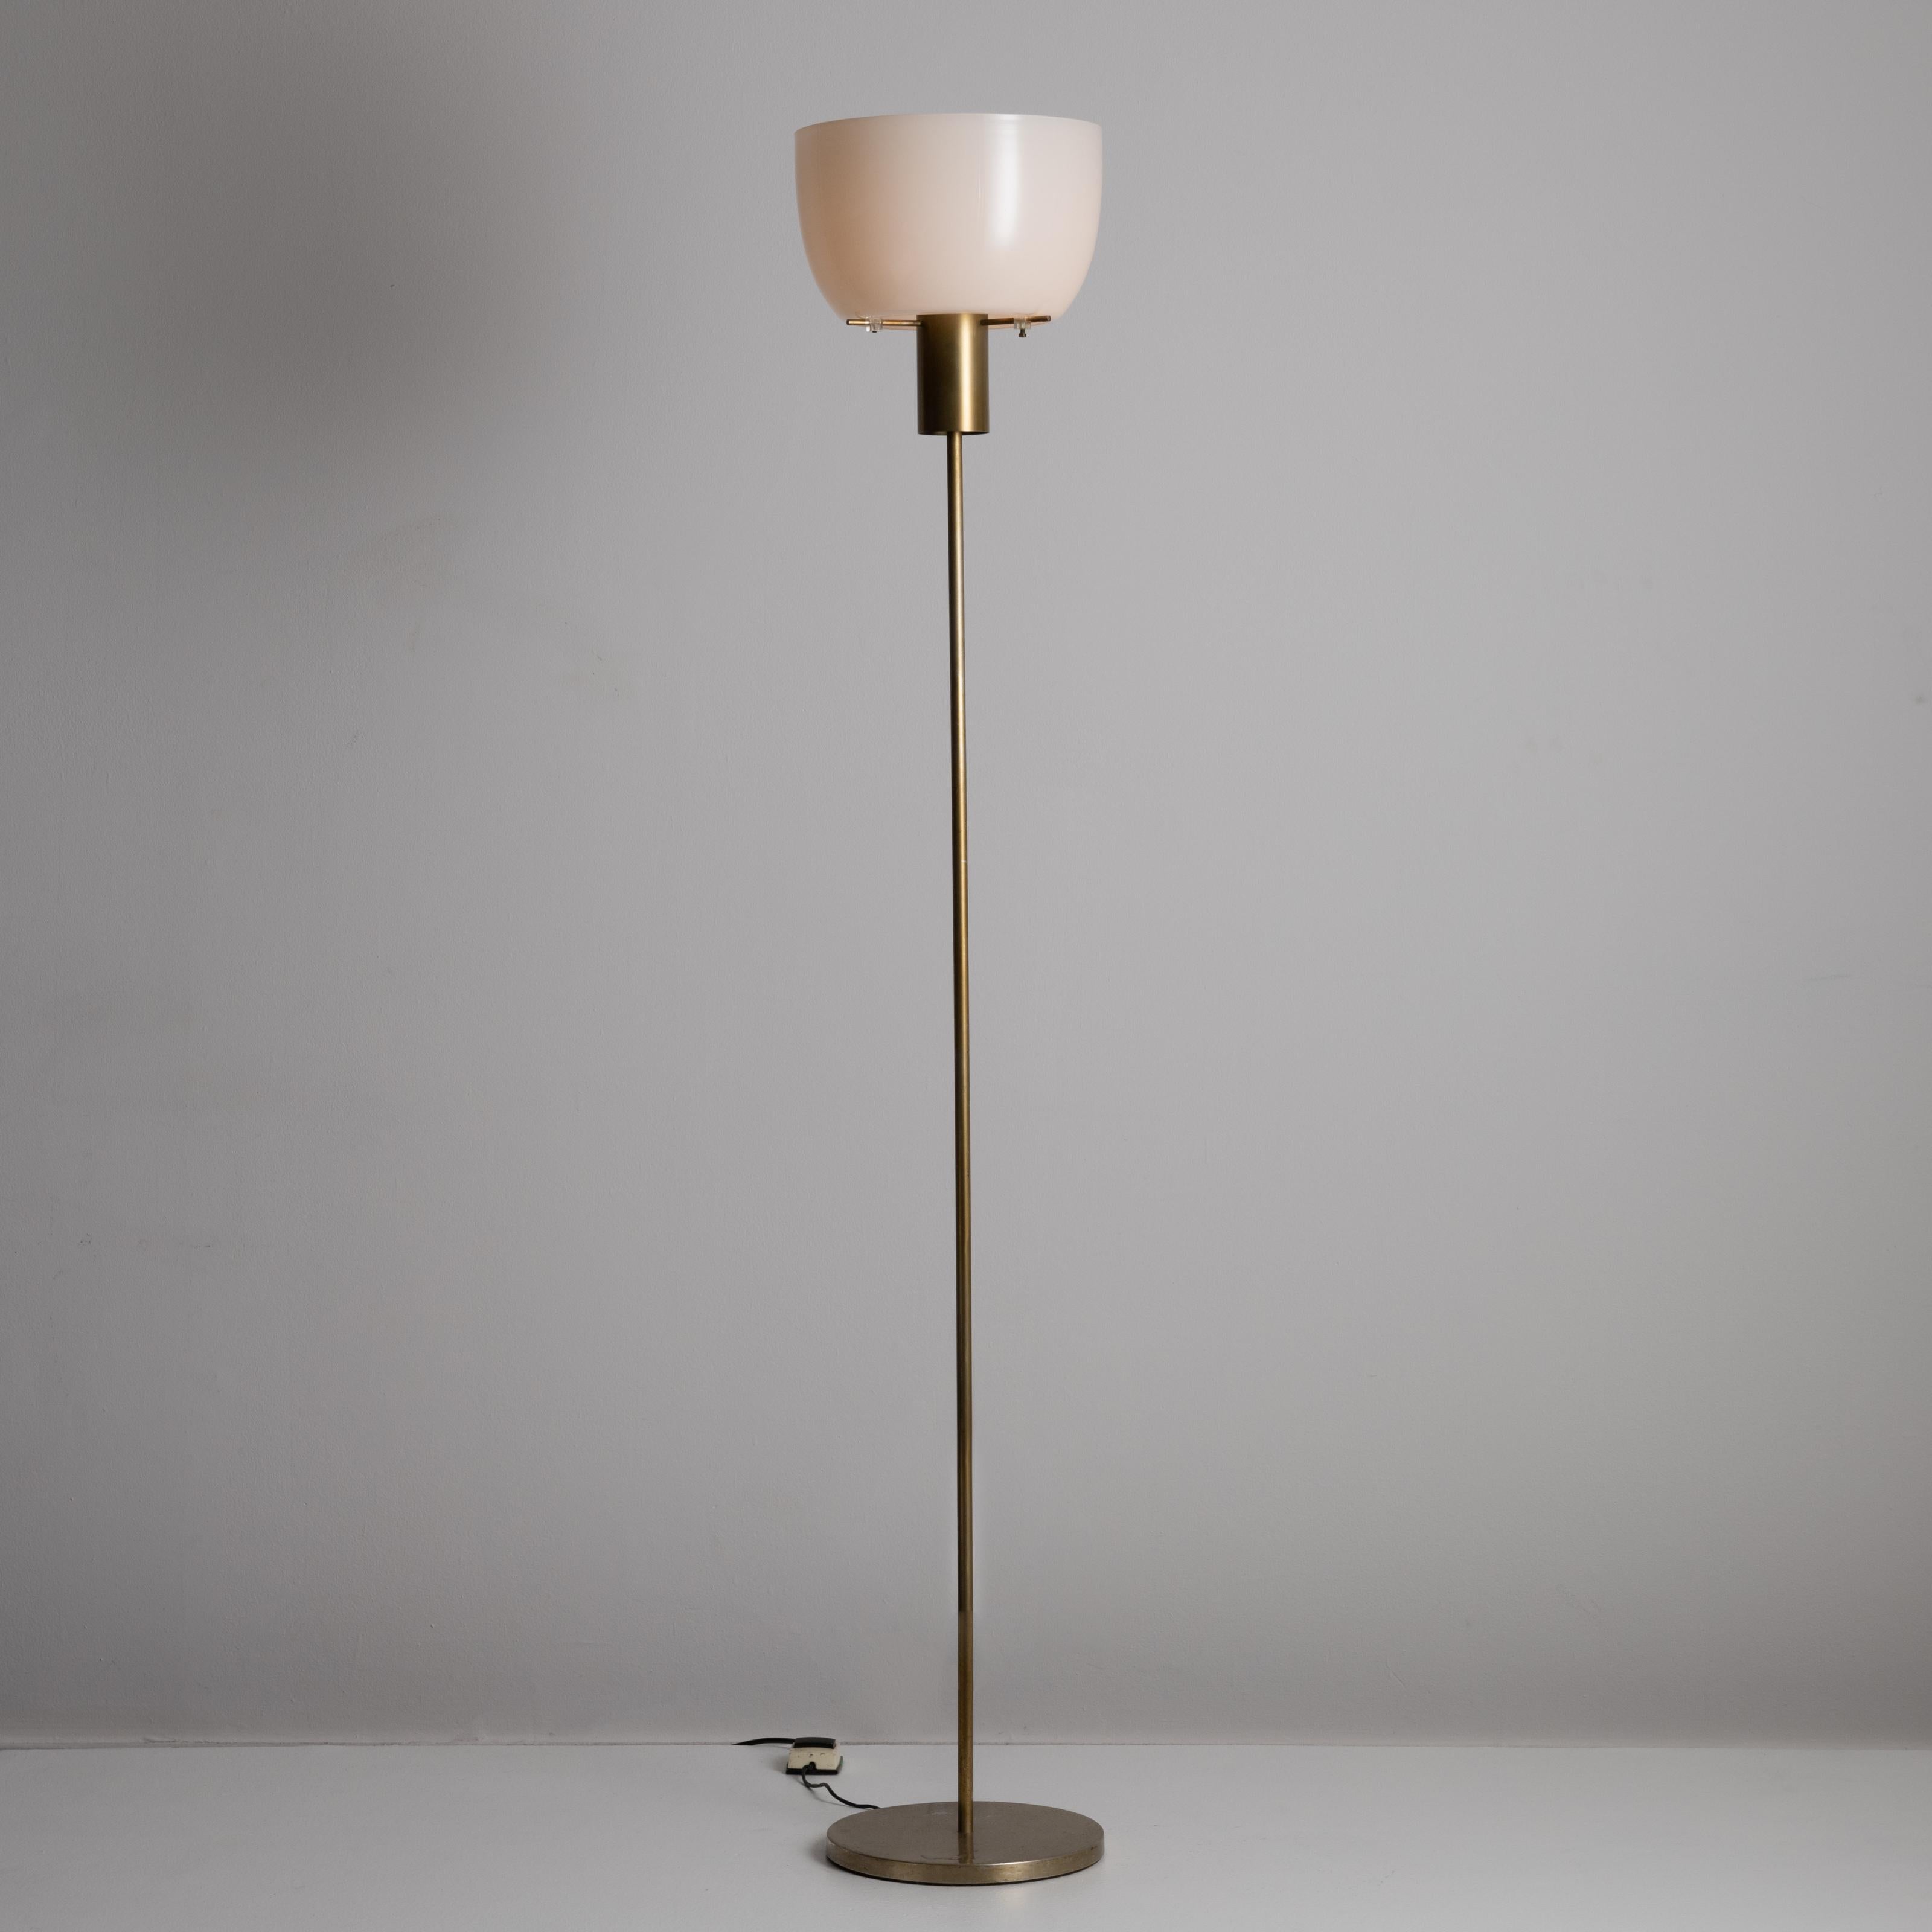 Model 3306 floor lamp by Ostuni & Forti for Oluce. Designed and manufactured in Italy, circa the 1960s. This model features a beautiful opaline glass shade, which sits directly onto a cross barred brass floor lamp stem. Though simplistic in nature,